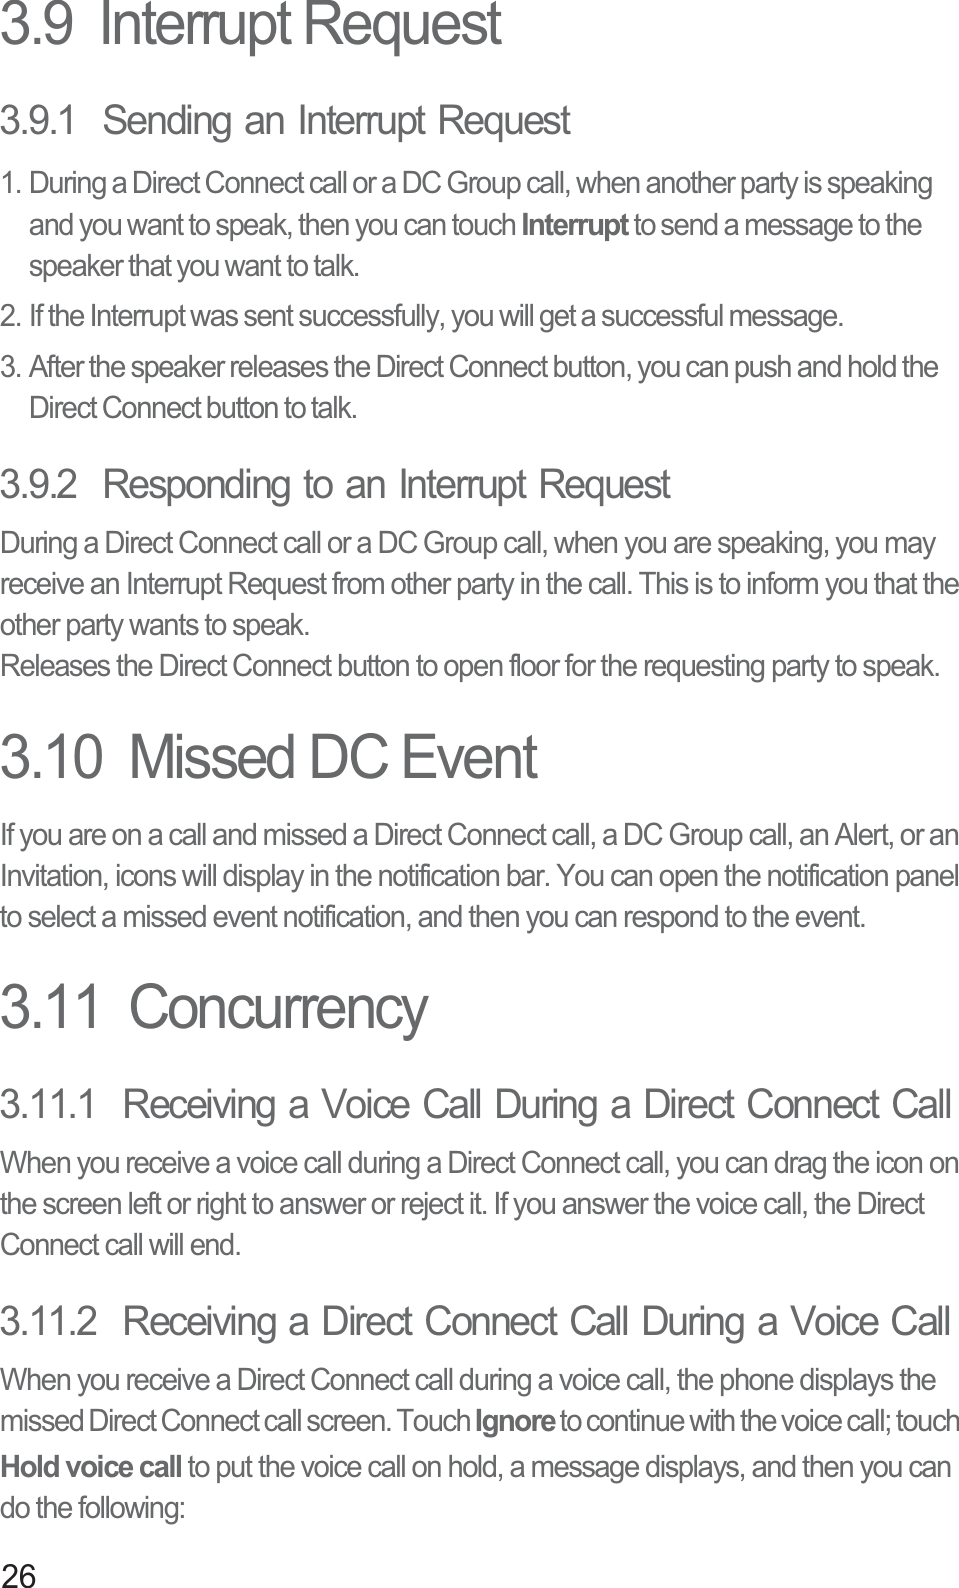 263.9  Interrupt Request3.9.1  Sending an Interrupt Request1. During a Direct Connect call or a DC Group call, when another party is speaking and you want to speak, then you can touch Interrupt to send a message to the speaker that you want to talk.2. If the Interrupt was sent successfully, you will get a successful message.3. After the speaker releases the Direct Connect button, you can push and hold the Direct Connect button to talk.3.9.2  Responding to an Interrupt RequestDuring a Direct Connect call or a DC Group call, when you are speaking, you may receive an Interrupt Request from other party in the call. This is to inform you that the other party wants to speak.Releases the Direct Connect button to open floor for the requesting party to speak.3.10  Missed DC EventIf you are on a call and missed a Direct Connect call, a DC Group call, an Alert, or an Invitation, icons will display in the notification bar. You can open the notification panel to select a missed event notification, and then you can respond to the event.3.11  Concurrency3.11.1  Receiving a Voice Call During a Direct Connect CallWhen you receive a voice call during a Direct Connect call, you can drag the icon on the screen left or right to answer or reject it. If you answer the voice call, the Direct Connect call will end.3.11.2  Receiving a Direct Connect Call During a Voice CallWhen you receive a Direct Connect call during a voice call, the phone displays the missed Direct Connect call screen. Touch Ignore to continue with the voice call; touch Hold voice call to put the voice call on hold, a message displays, and then you can do the following: